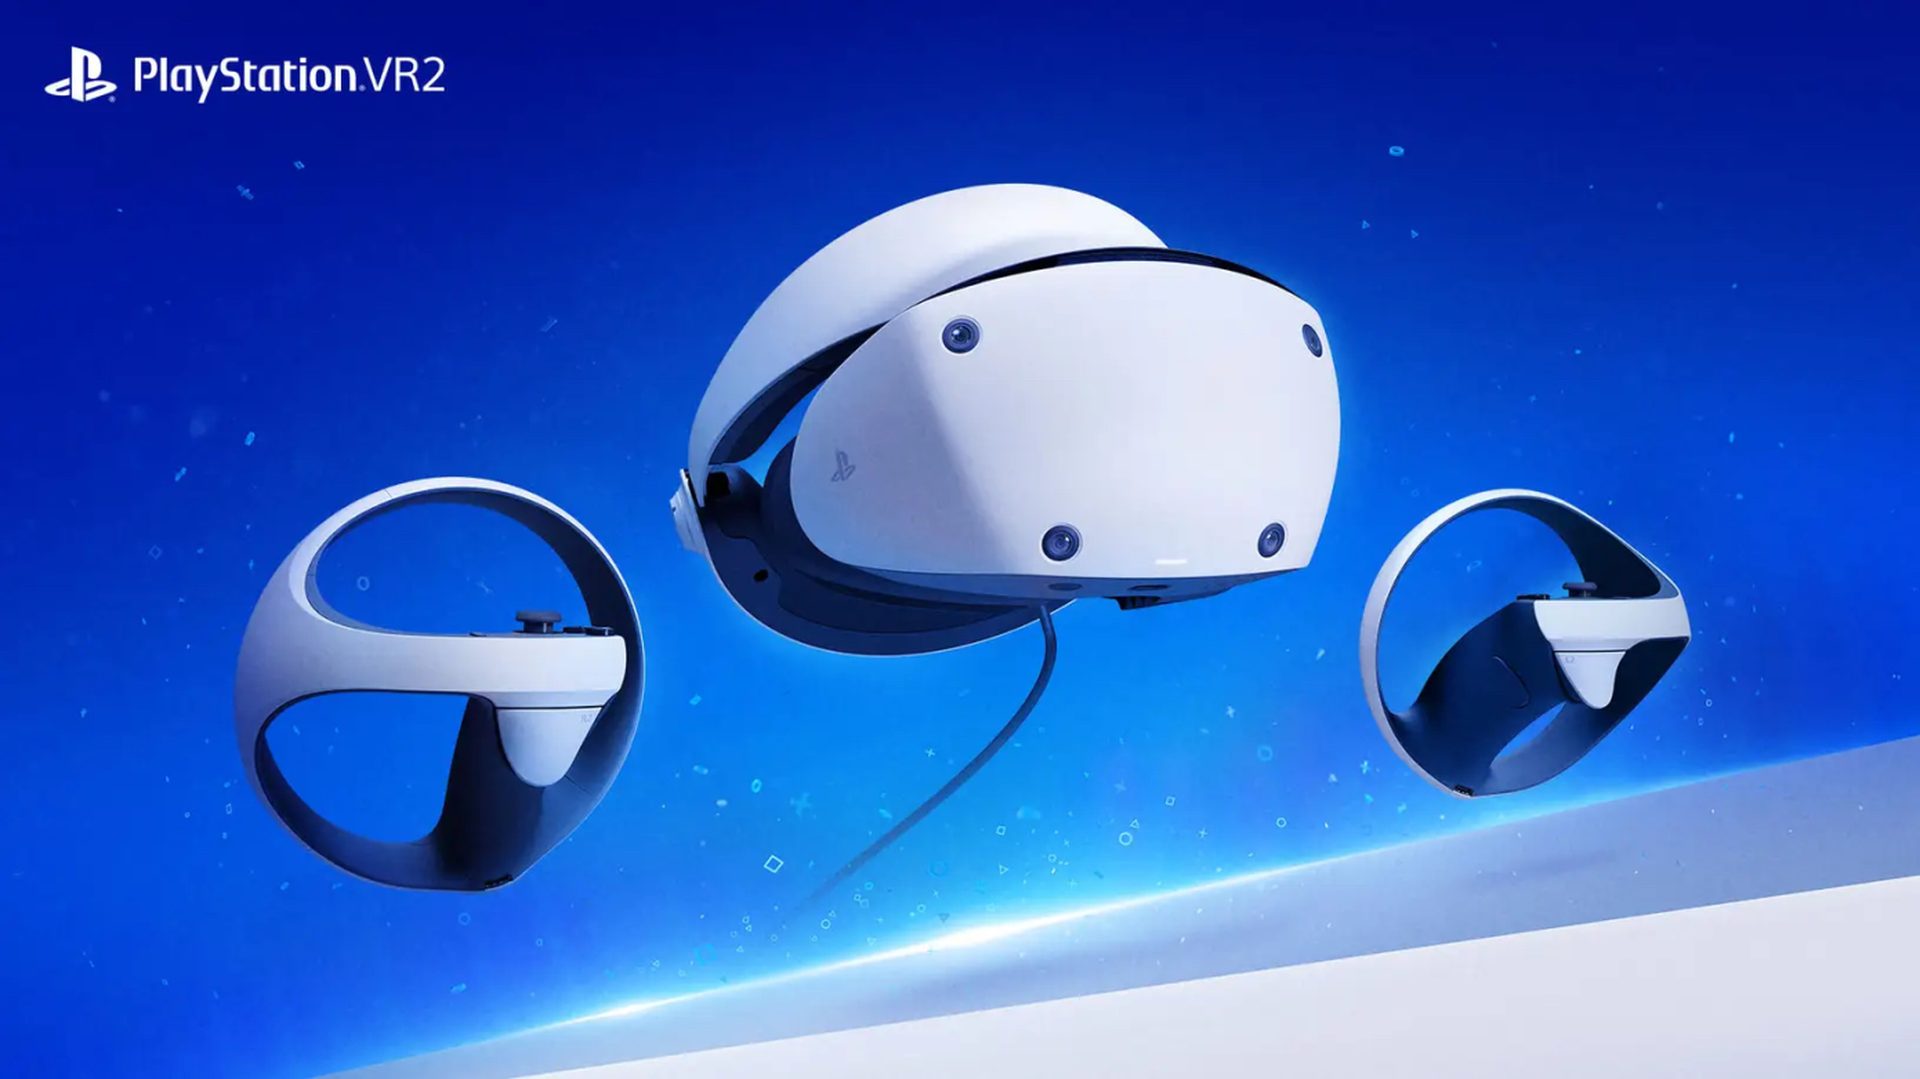 PlayStation VR2 price, pre-order, and release date